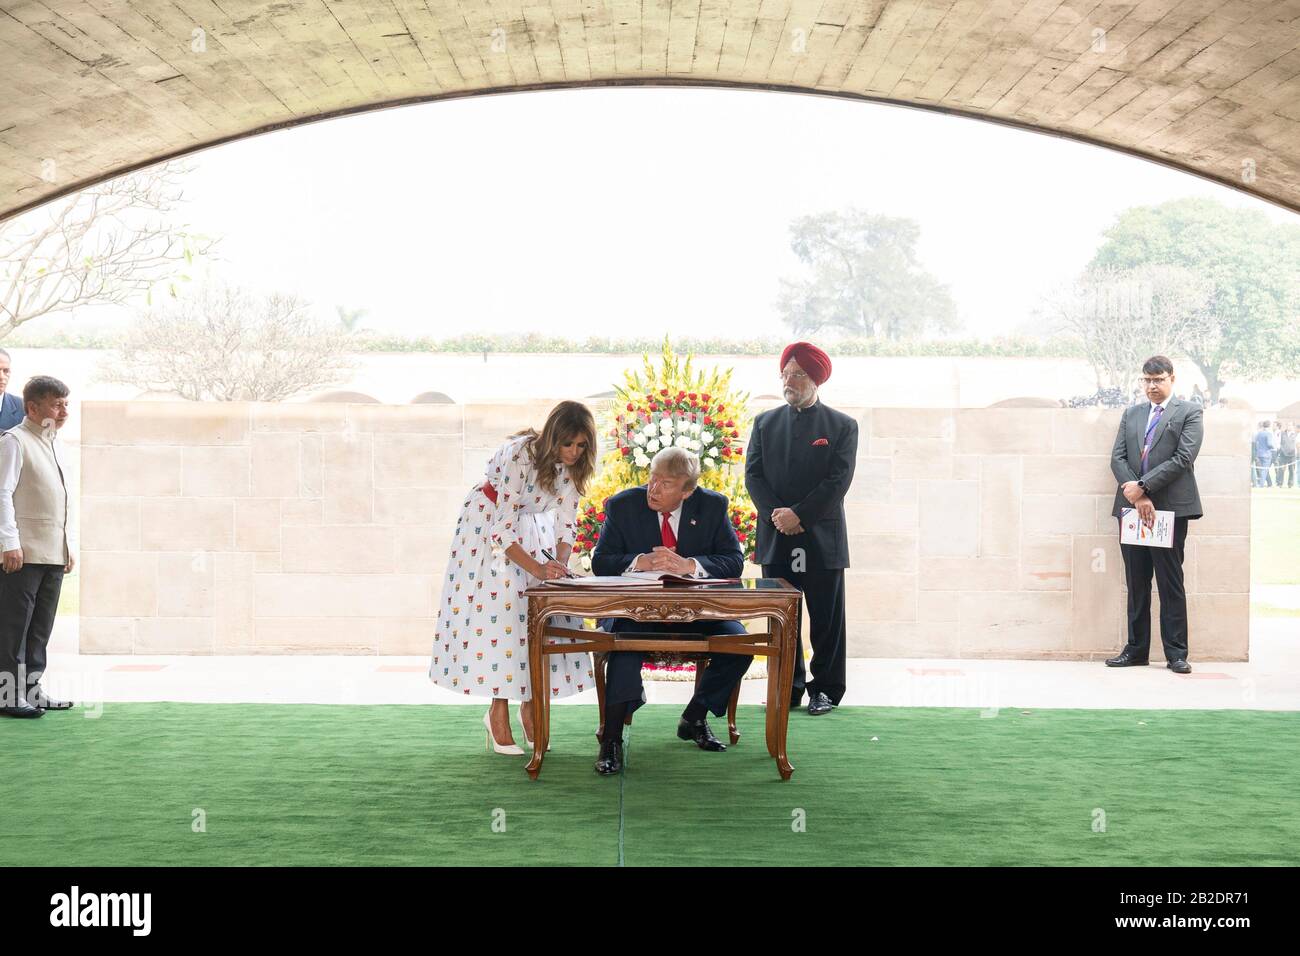 U.S. President Donald Trump and First Lady Melania Trump sign the guest book at the memorial to Mahatma Gandhi at Raj Ghat February 25, 2020 in New Delhi, India. Indian Minister of State for Civil Aviation, Housing and Urban Affairs Hardeep Singh Puri is to the right. Stock Photo